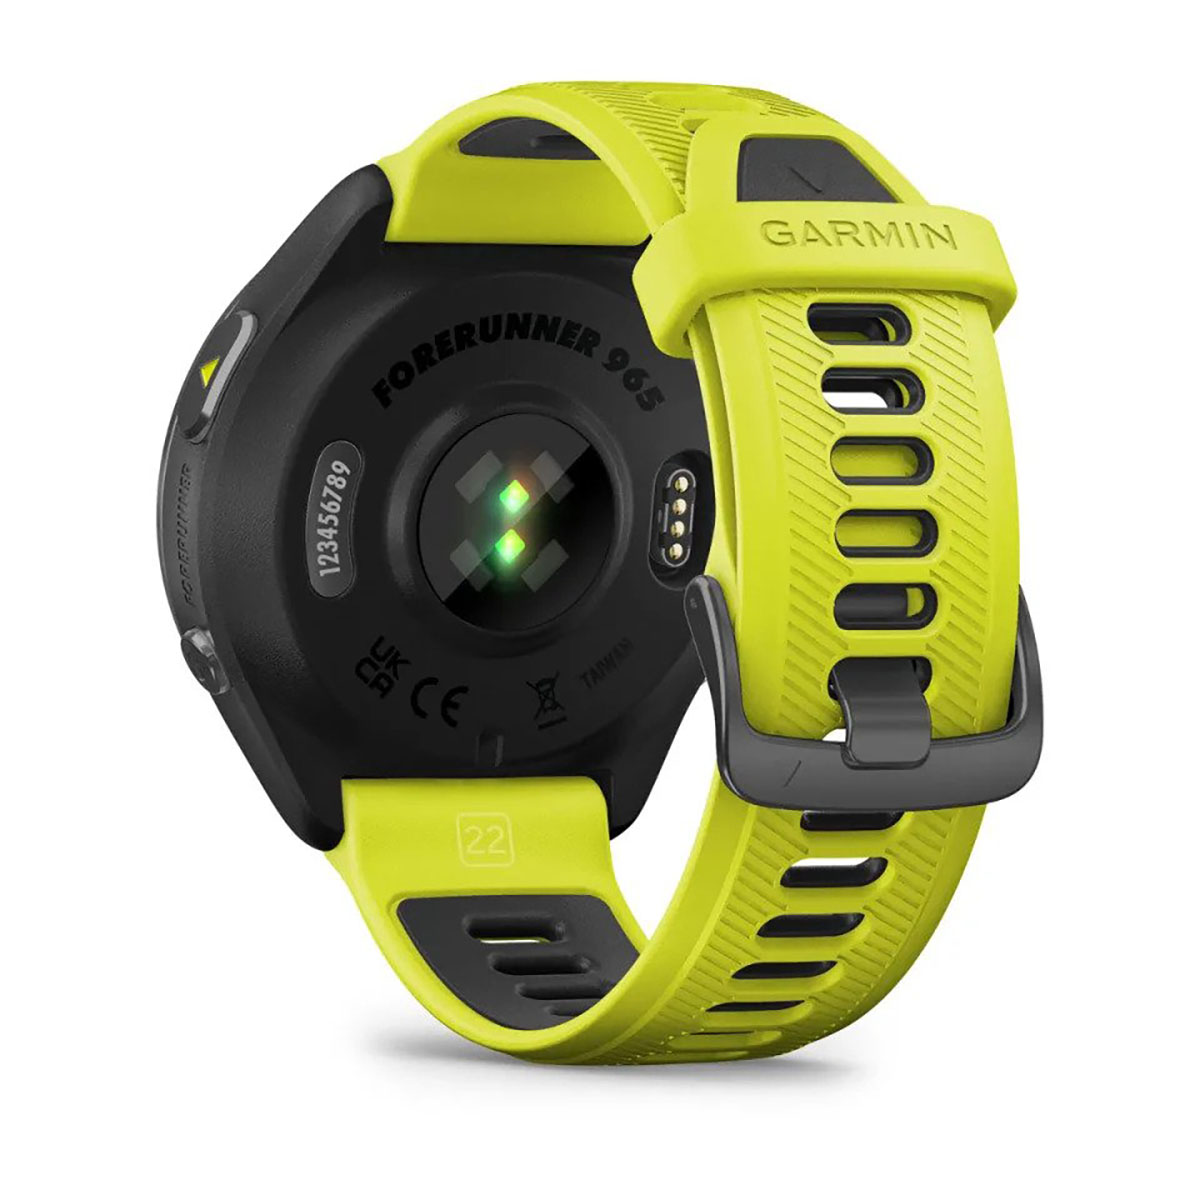 Garmin Introduces AMOLED-Equipped Forerunner 265 And Forerunner 965 Watches  